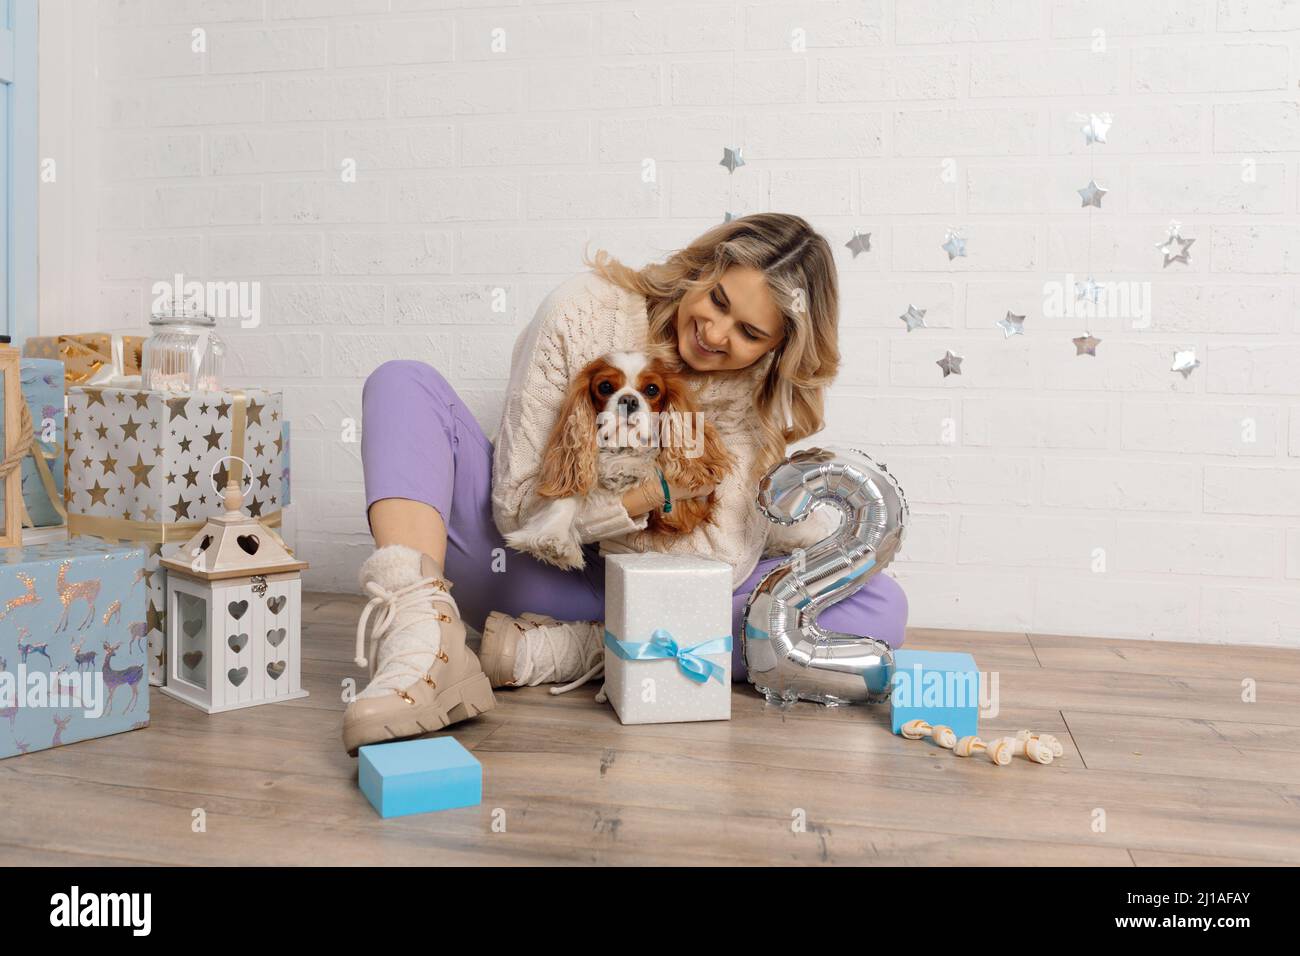 Happy well-groomed woman hug dog spaniel tight, sitting on floor near gift boxes and silver number two made of balloon. Stock Photo